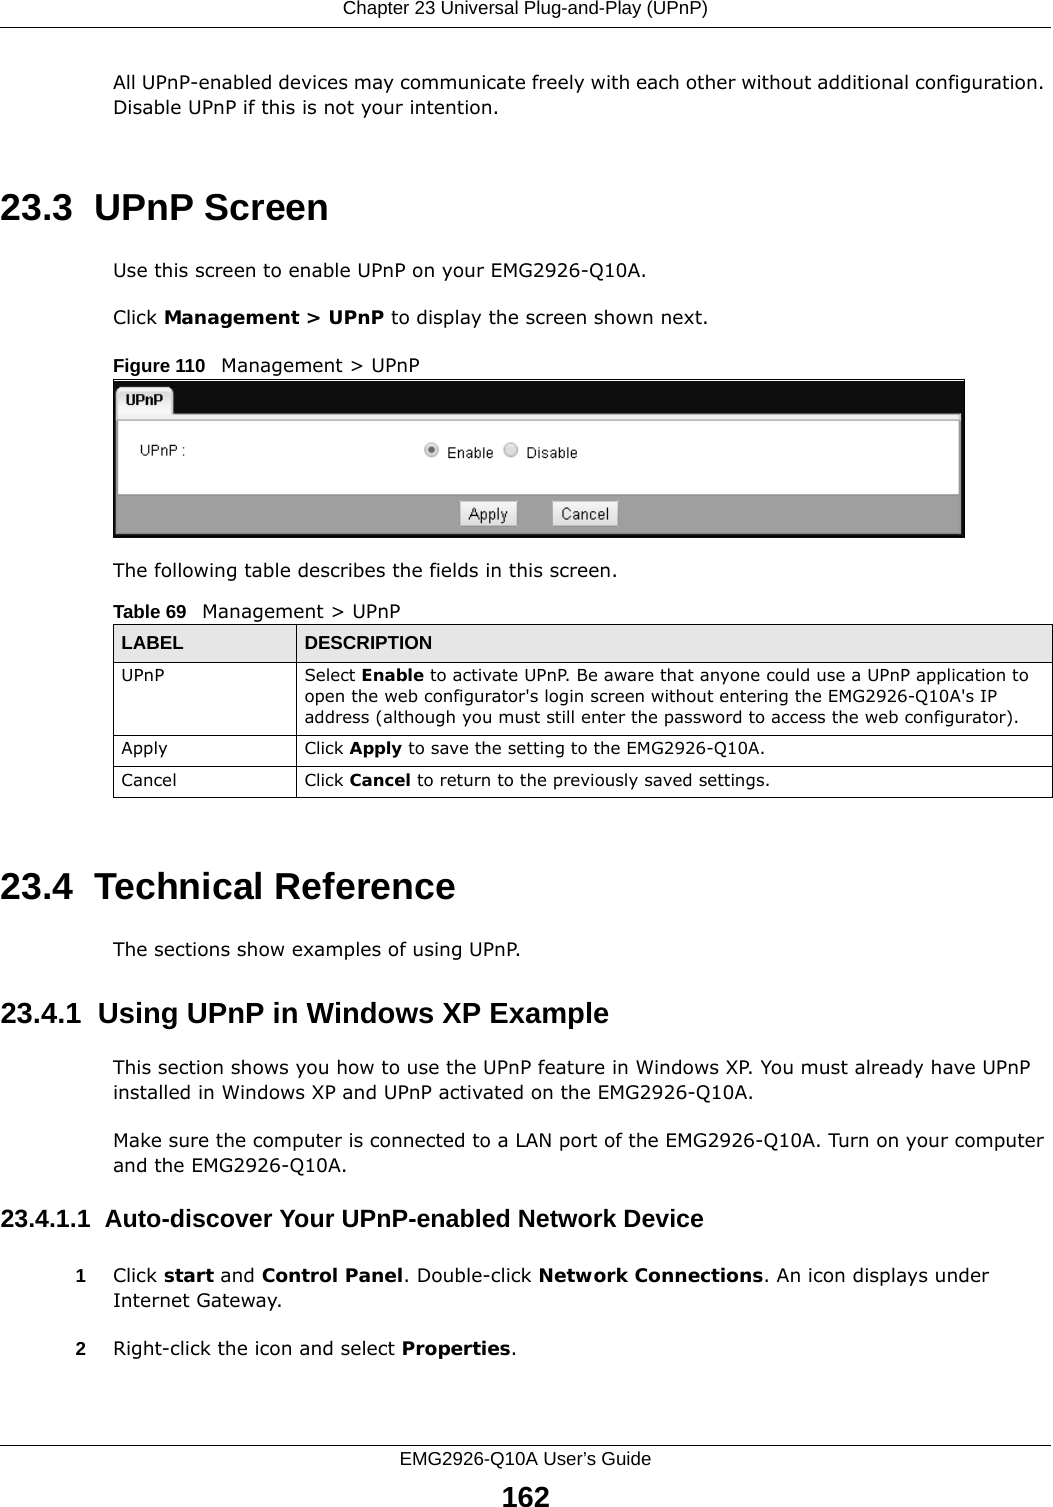 Chapter 23 Universal Plug-and-Play (UPnP)EMG2926-Q10A User’s Guide162All UPnP-enabled devices may communicate freely with each other without additional configuration. Disable UPnP if this is not your intention. 23.3  UPnP Screen Use this screen to enable UPnP on your EMG2926-Q10A.Click Management &gt; UPnP to display the screen shown next. Figure 110   Management &gt; UPnPThe following table describes the fields in this screen.23.4  Technical ReferenceThe sections show examples of using UPnP. 23.4.1  Using UPnP in Windows XP ExampleThis section shows you how to use the UPnP feature in Windows XP. You must already have UPnP installed in Windows XP and UPnP activated on the EMG2926-Q10A.Make sure the computer is connected to a LAN port of the EMG2926-Q10A. Turn on your computer and the EMG2926-Q10A. 23.4.1.1  Auto-discover Your UPnP-enabled Network Device1Click start and Control Panel. Double-click Network Connections. An icon displays under Internet Gateway.2Right-click the icon and select Properties. Table 69   Management &gt; UPnPLABEL DESCRIPTIONUPnP Select Enable to activate UPnP. Be aware that anyone could use a UPnP application to open the web configurator&apos;s login screen without entering the EMG2926-Q10A&apos;s IP address (although you must still enter the password to access the web configurator).Apply Click Apply to save the setting to the EMG2926-Q10A.Cancel Click Cancel to return to the previously saved settings.